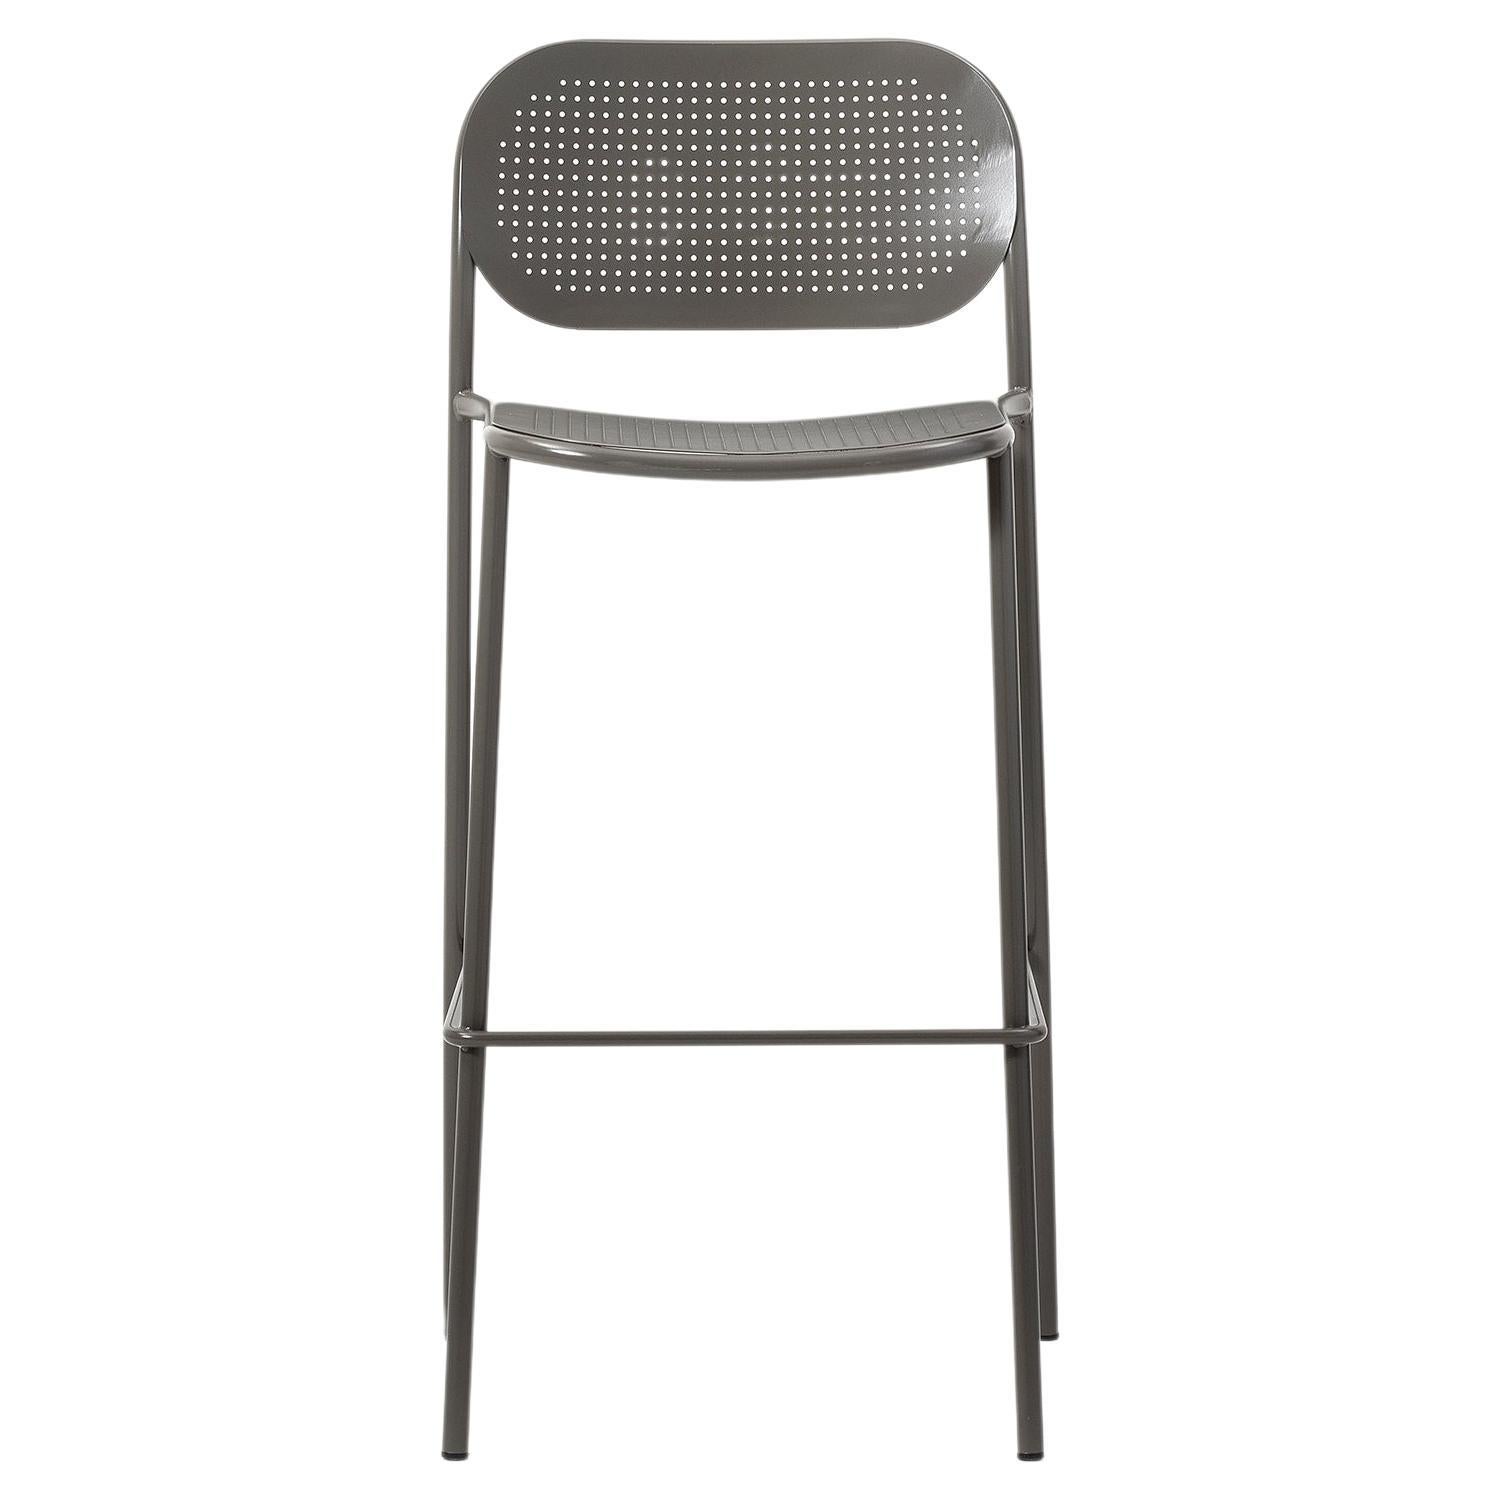 Metis 0174 Dot Stool, Bar, Fastfood, Metal, Colors, Outdoor, Contract, Restaurant For Sale